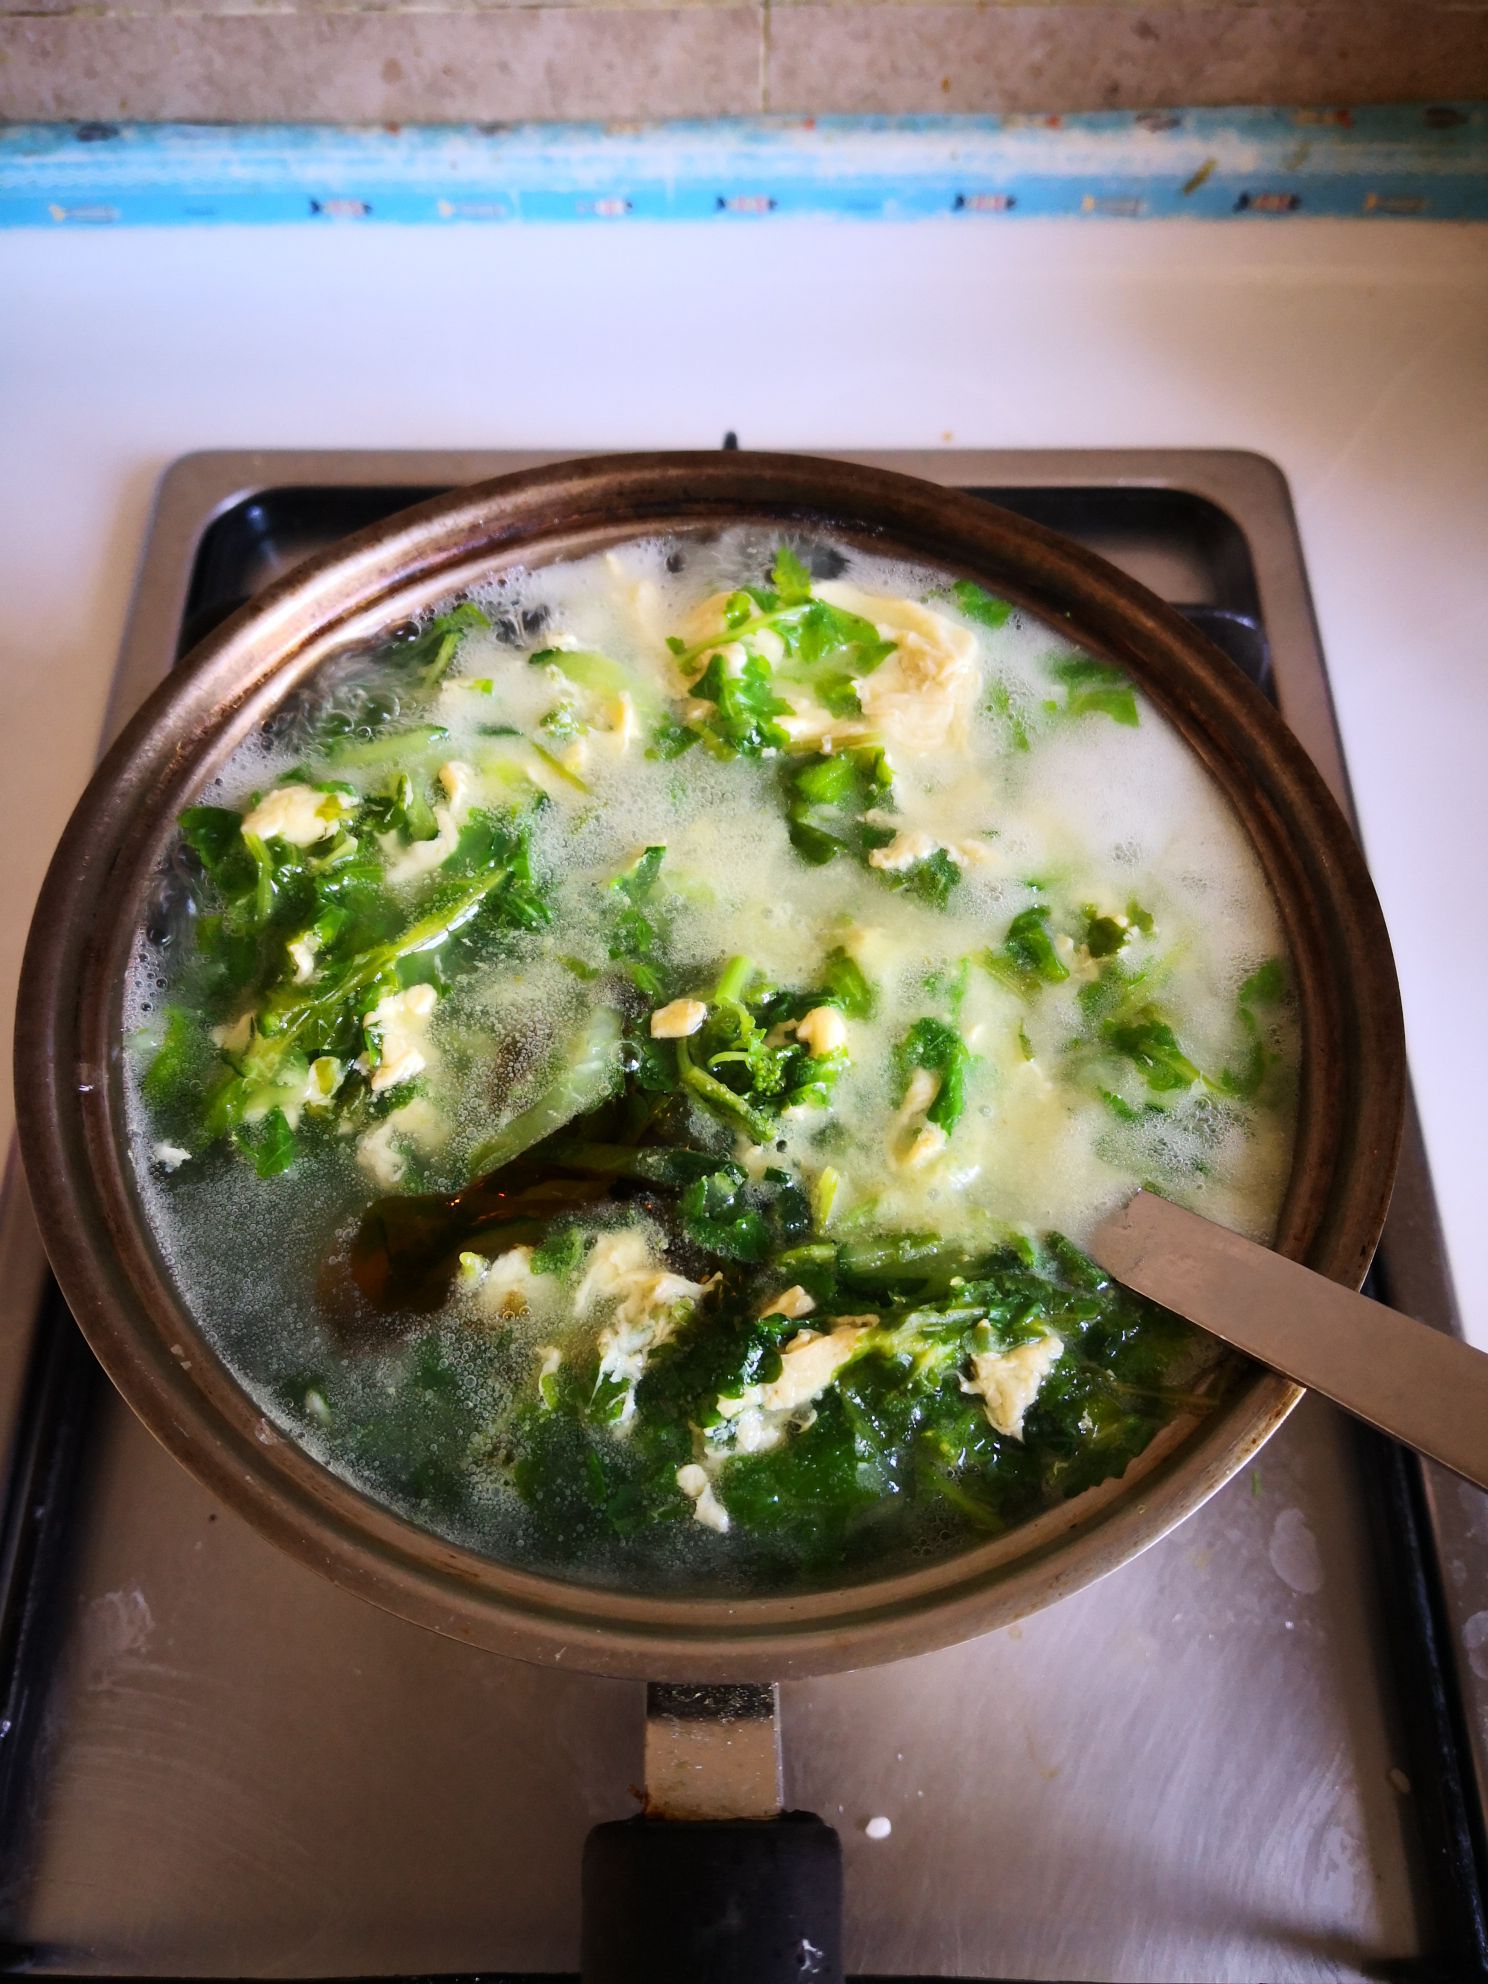 Local Vegetable and Egg Soup recipe